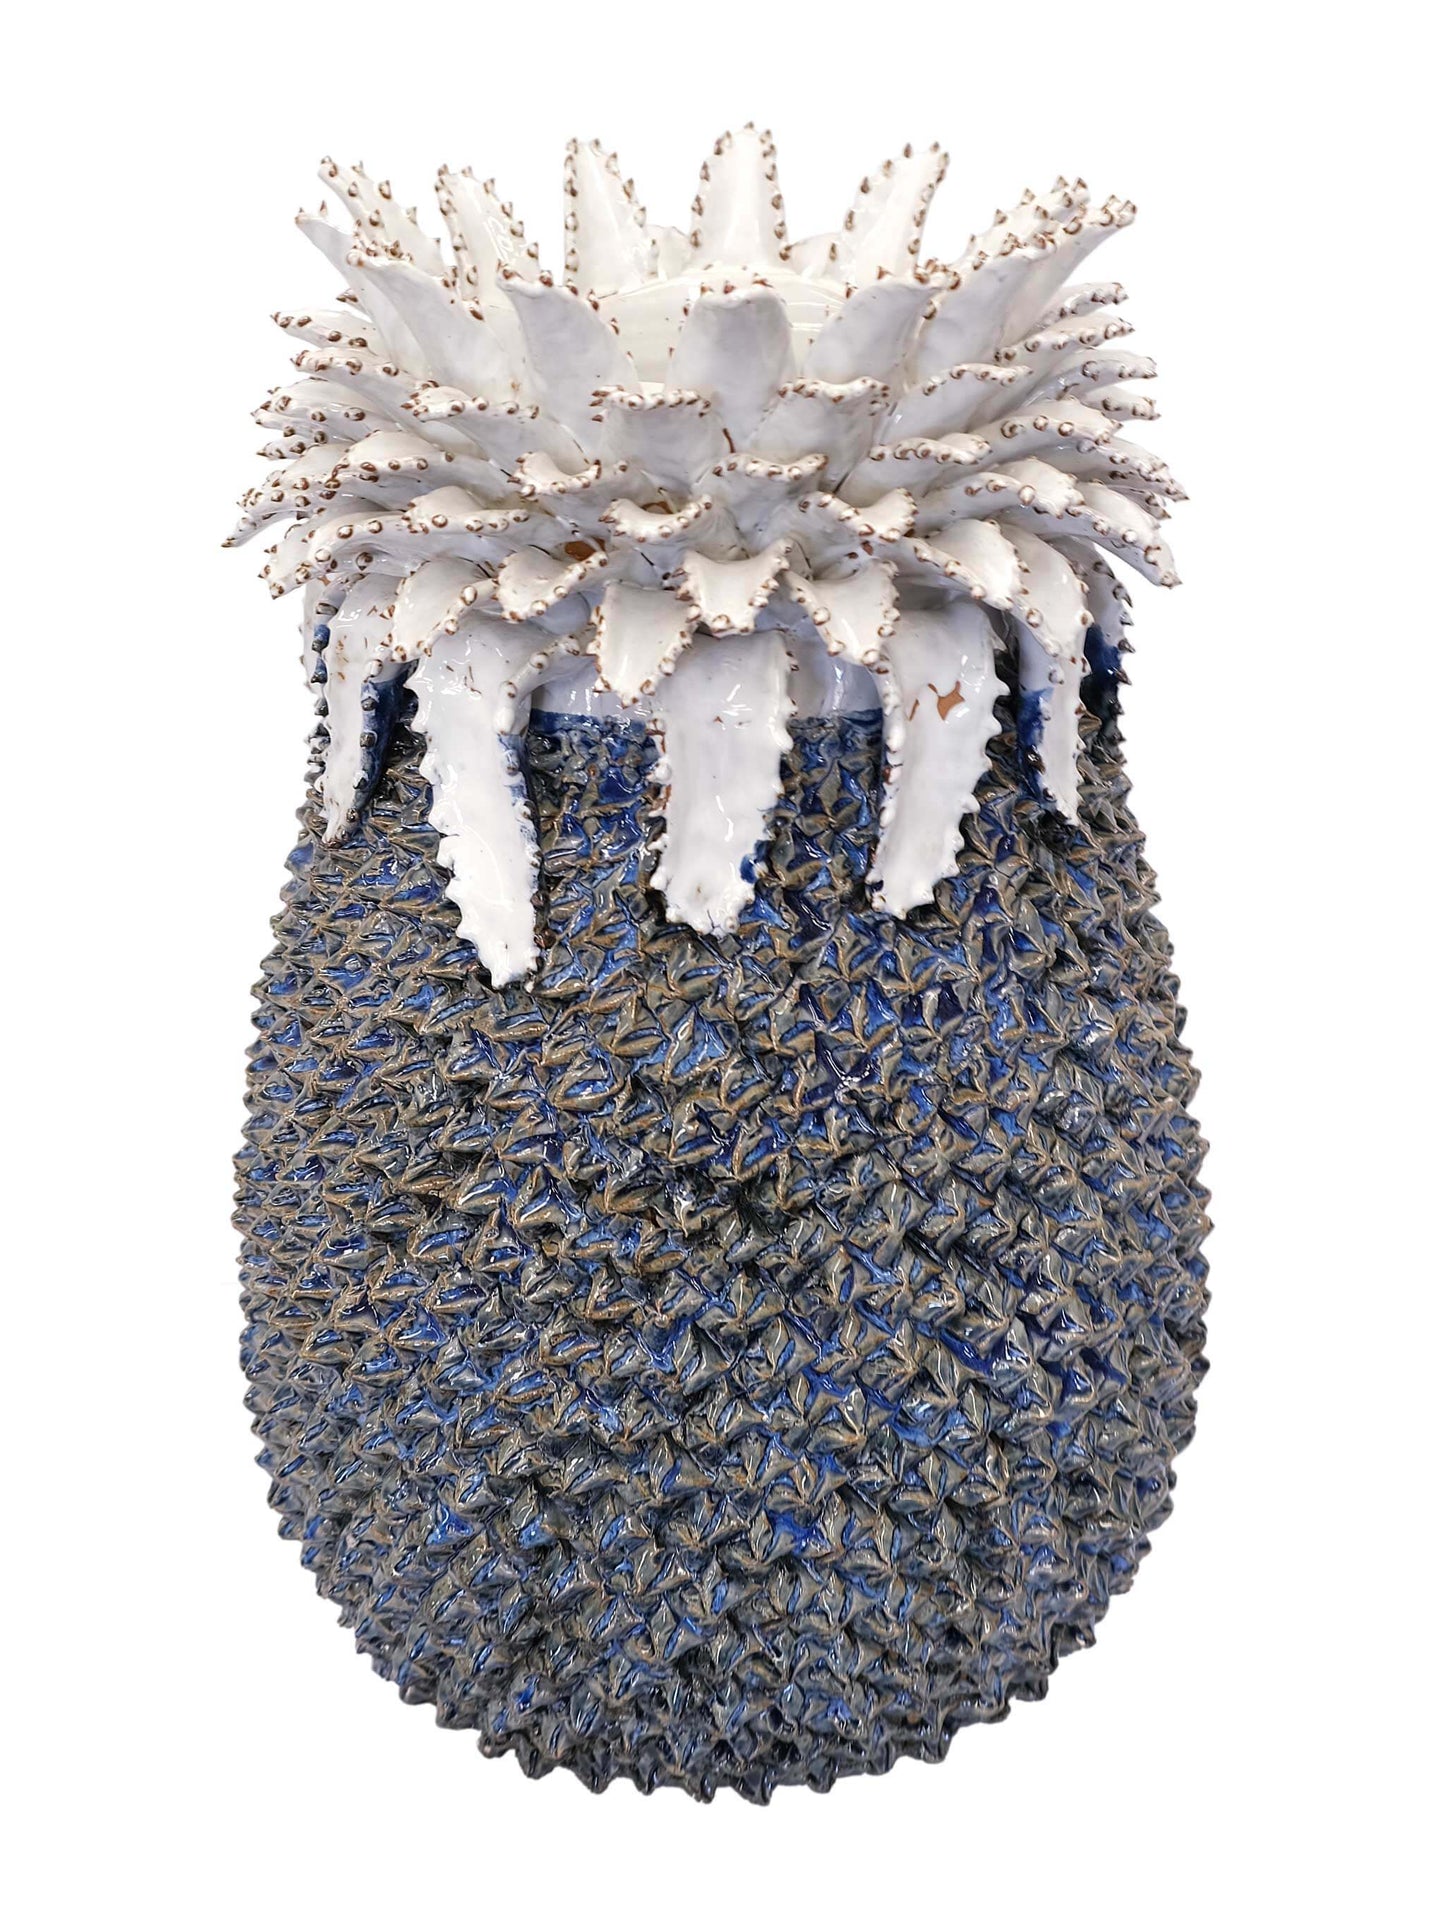 Handcrafted Ceramic Pineapple Vase Blue and White 46cm Height - Shop Charlies Interiors